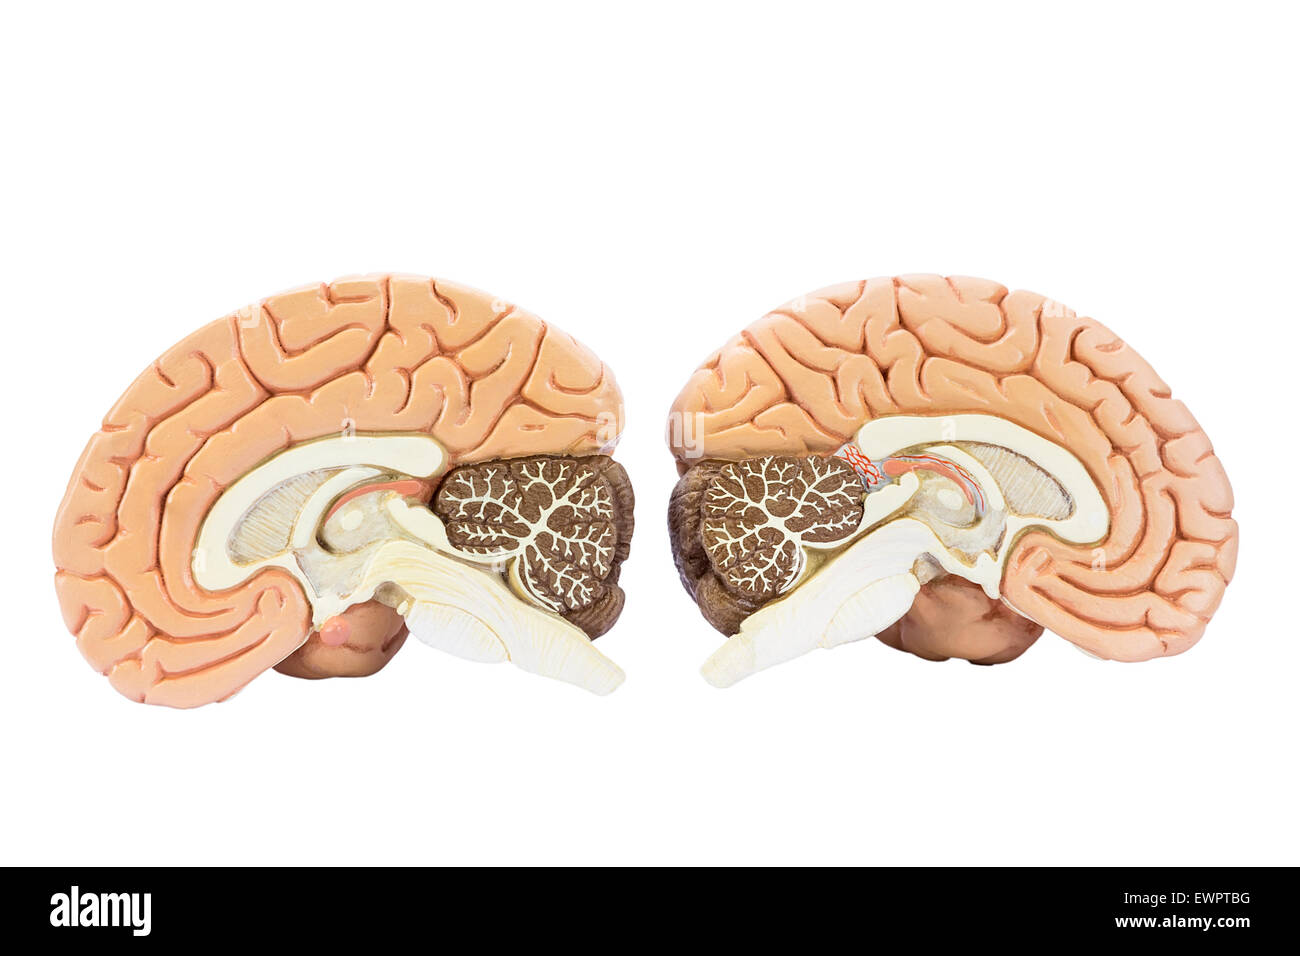 Cross section of two artificial human hemispheres, two halves of brain for education, isolated on white background Stock Photo